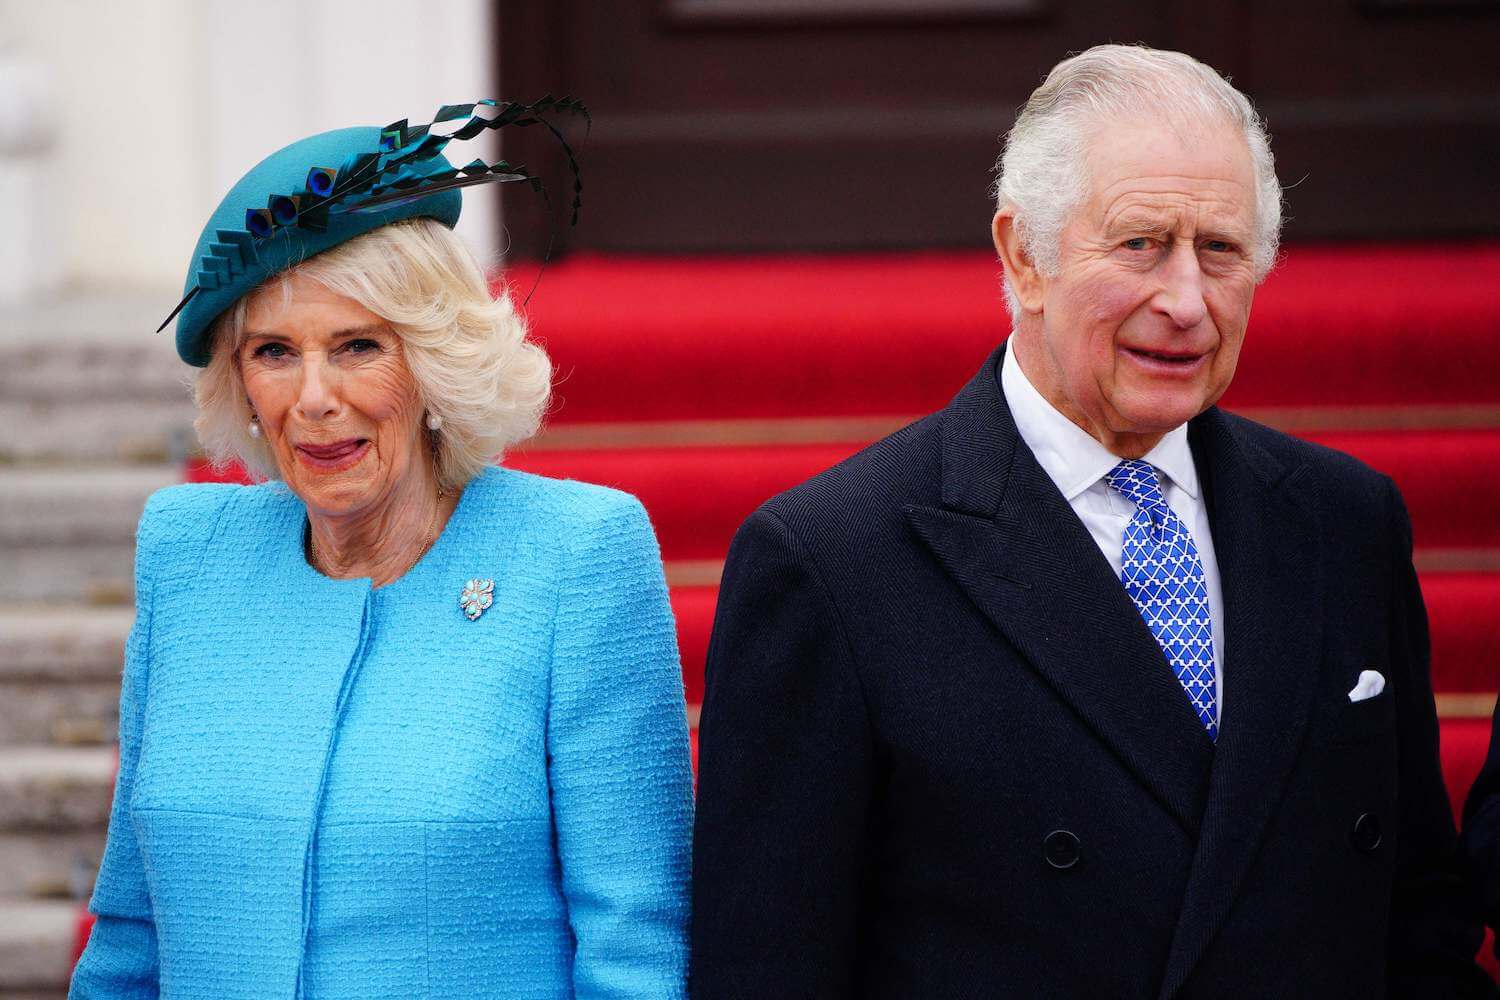 Camilla Parker Bowles wears a vibrant blue outfit with matching hat while standing next to King Charles dressed in a dark jacket and tie